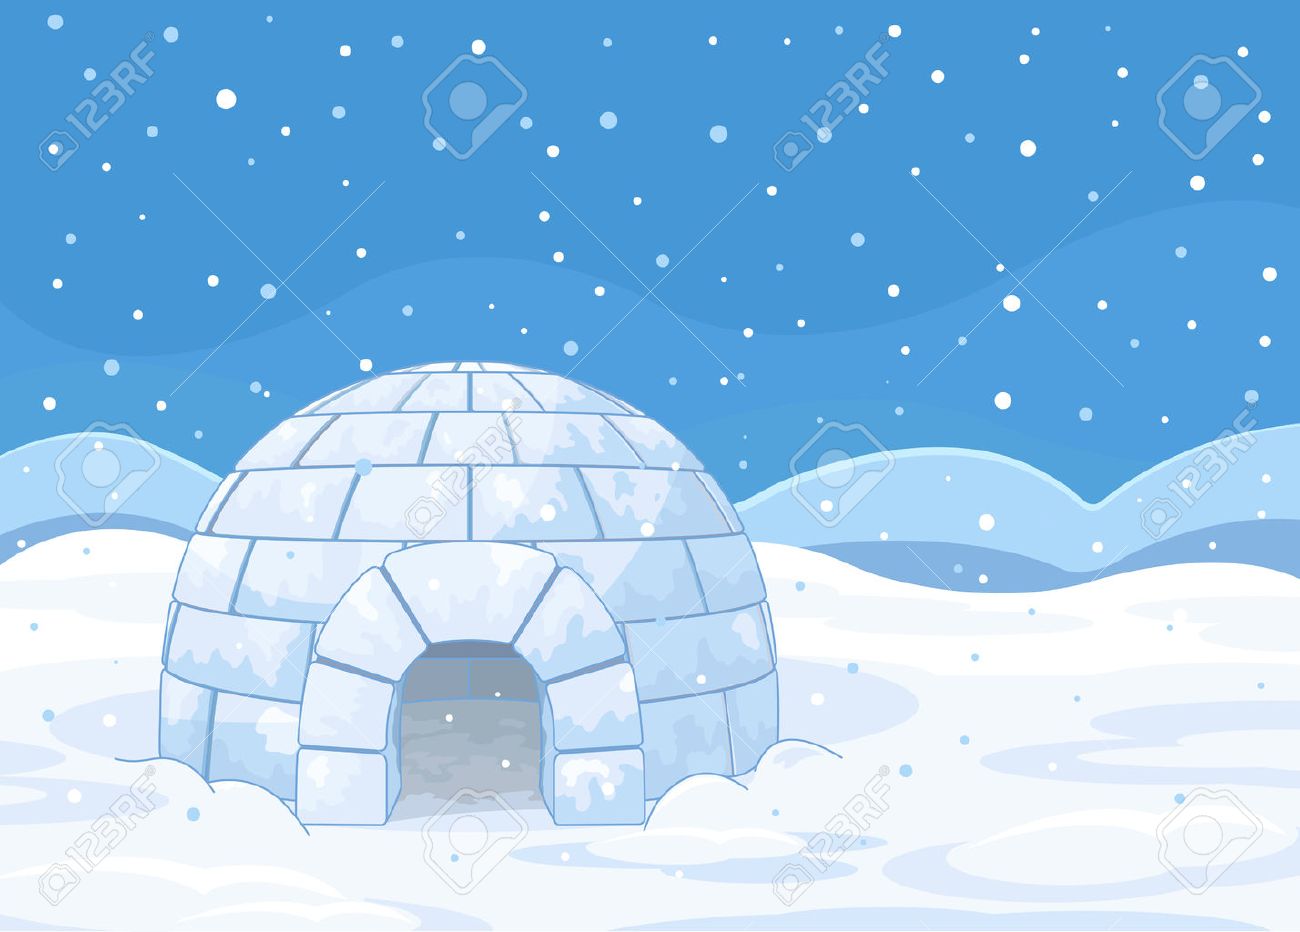 Illustration Of An Igloo On Winter Background Royalty